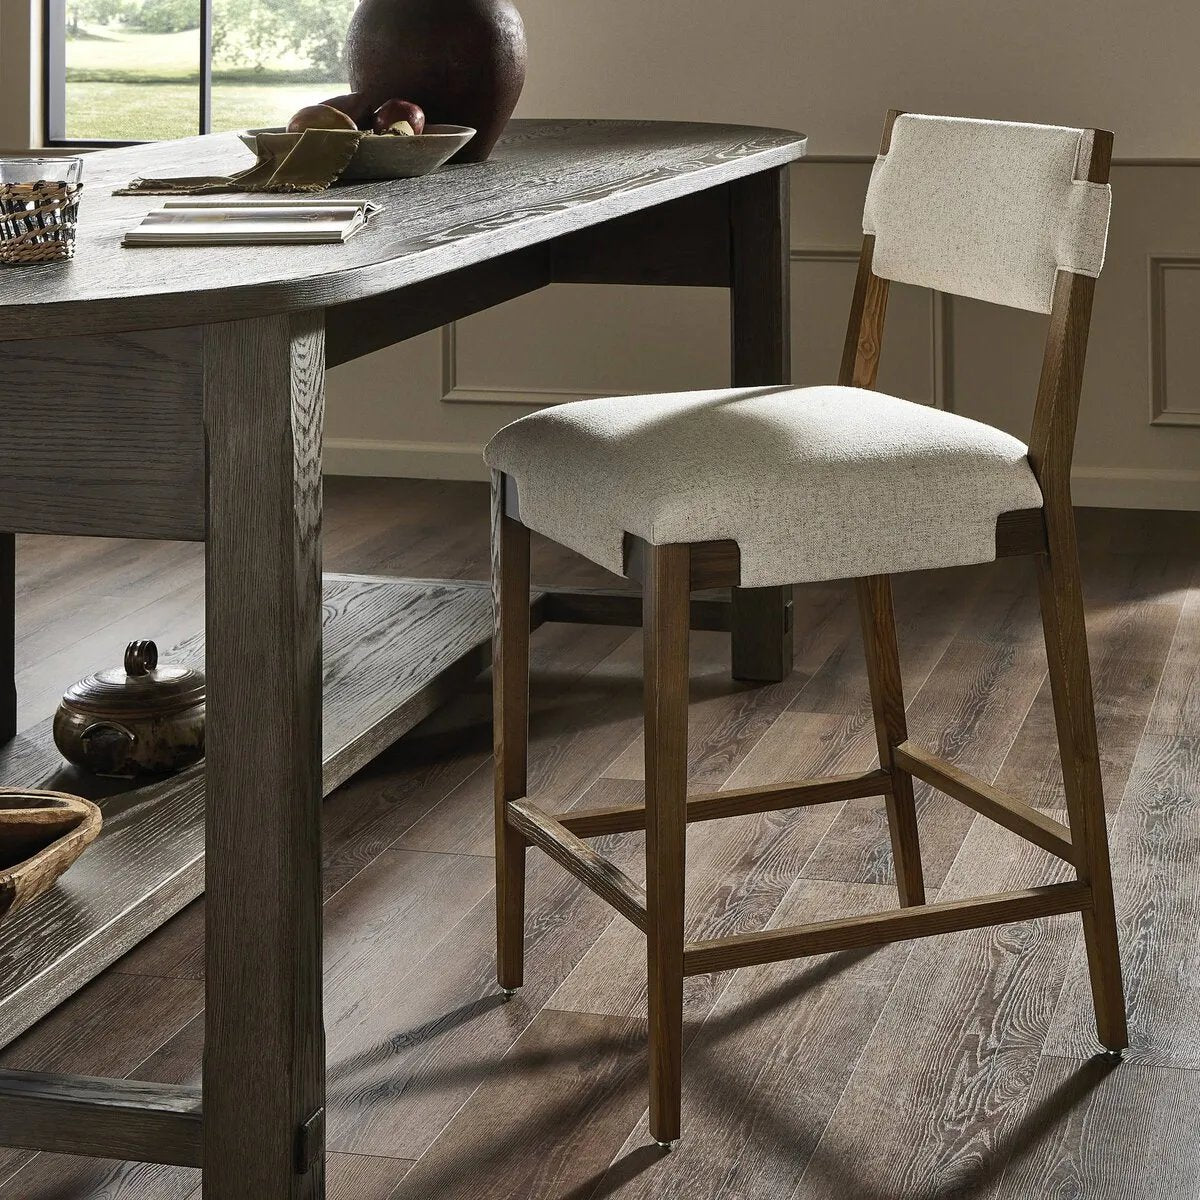 Expertly crafted, the Tamari Antwerp Natural Bar and Counter Stool is a versatile and durable addition to your home. Made from high-quality materials, this stool offers both comfort and convenience in one. Perfect for any bar or counter, it's ready to ship and elevate any space Amethyst Home provides interior design, new home construction design consulting, vintage area rugs, and lighting in the San Diego metro area.